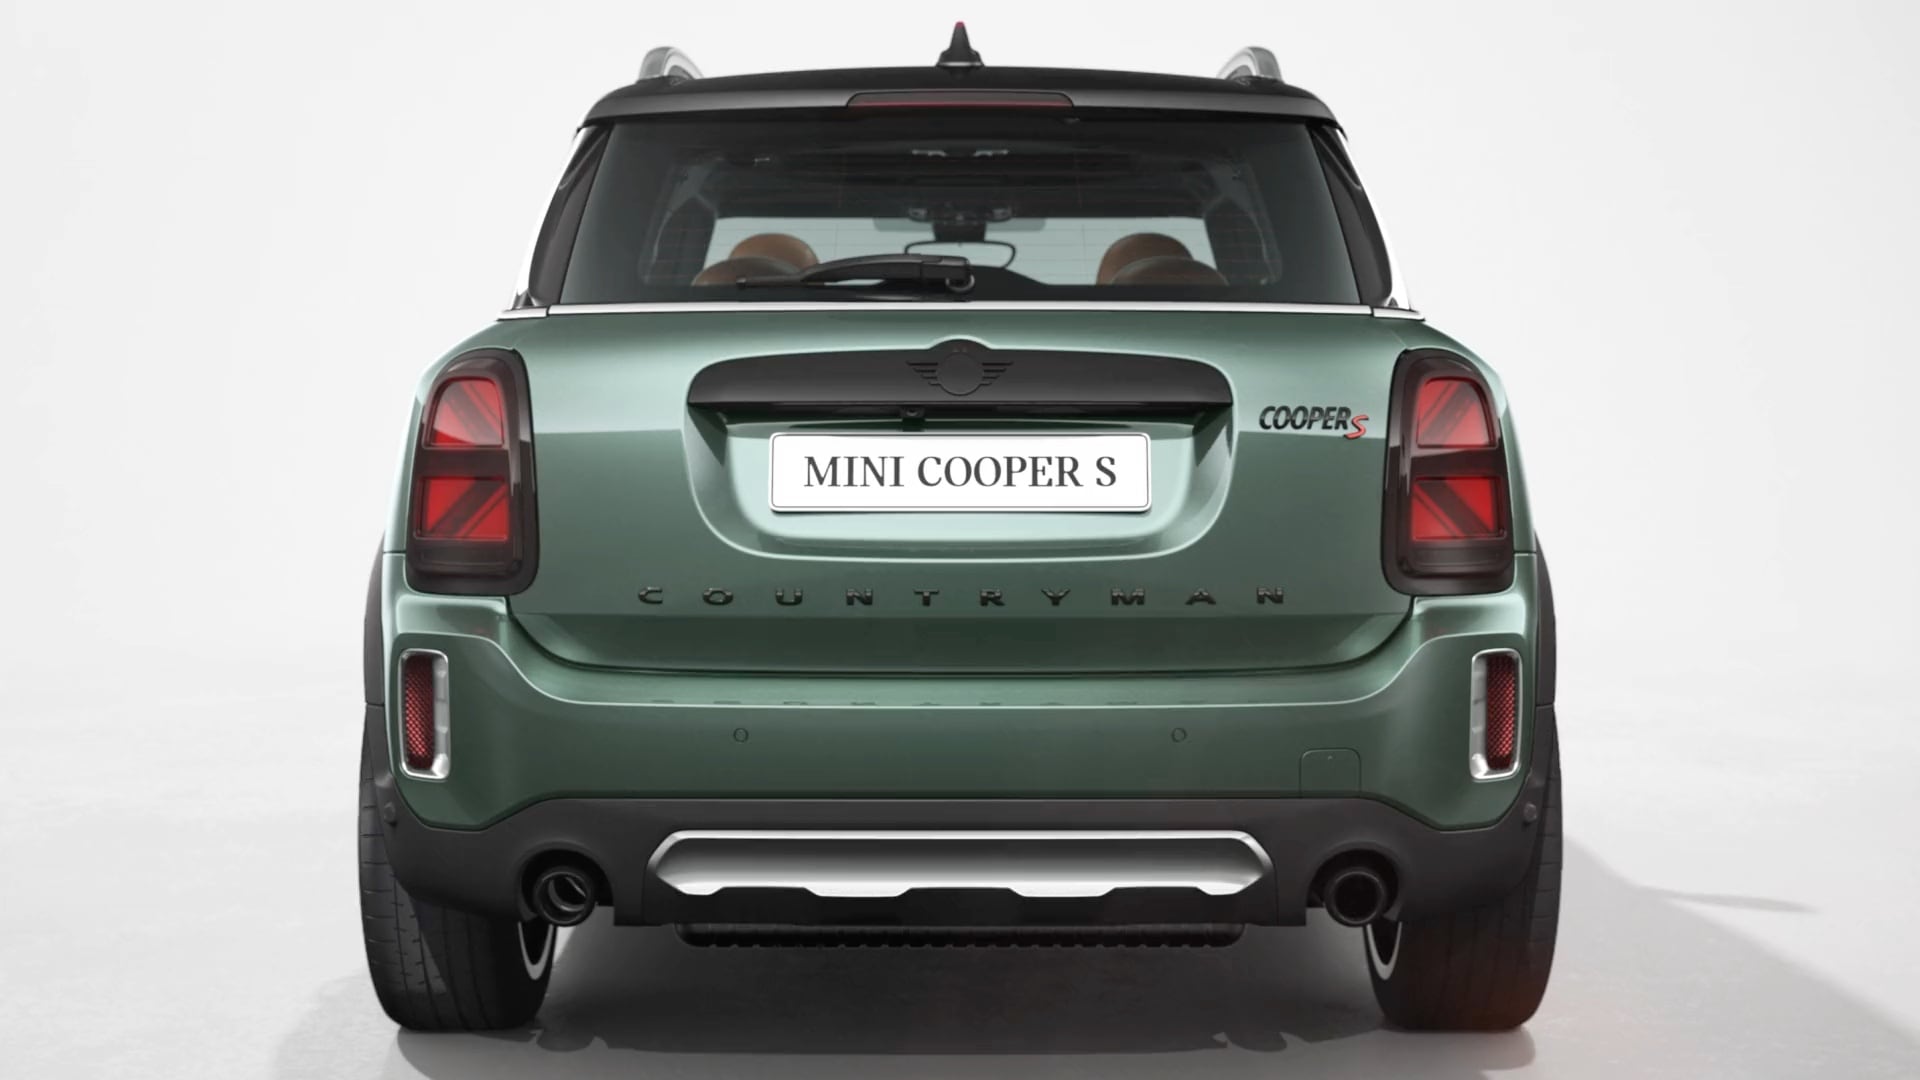 MINI Countryman – front view – green and black